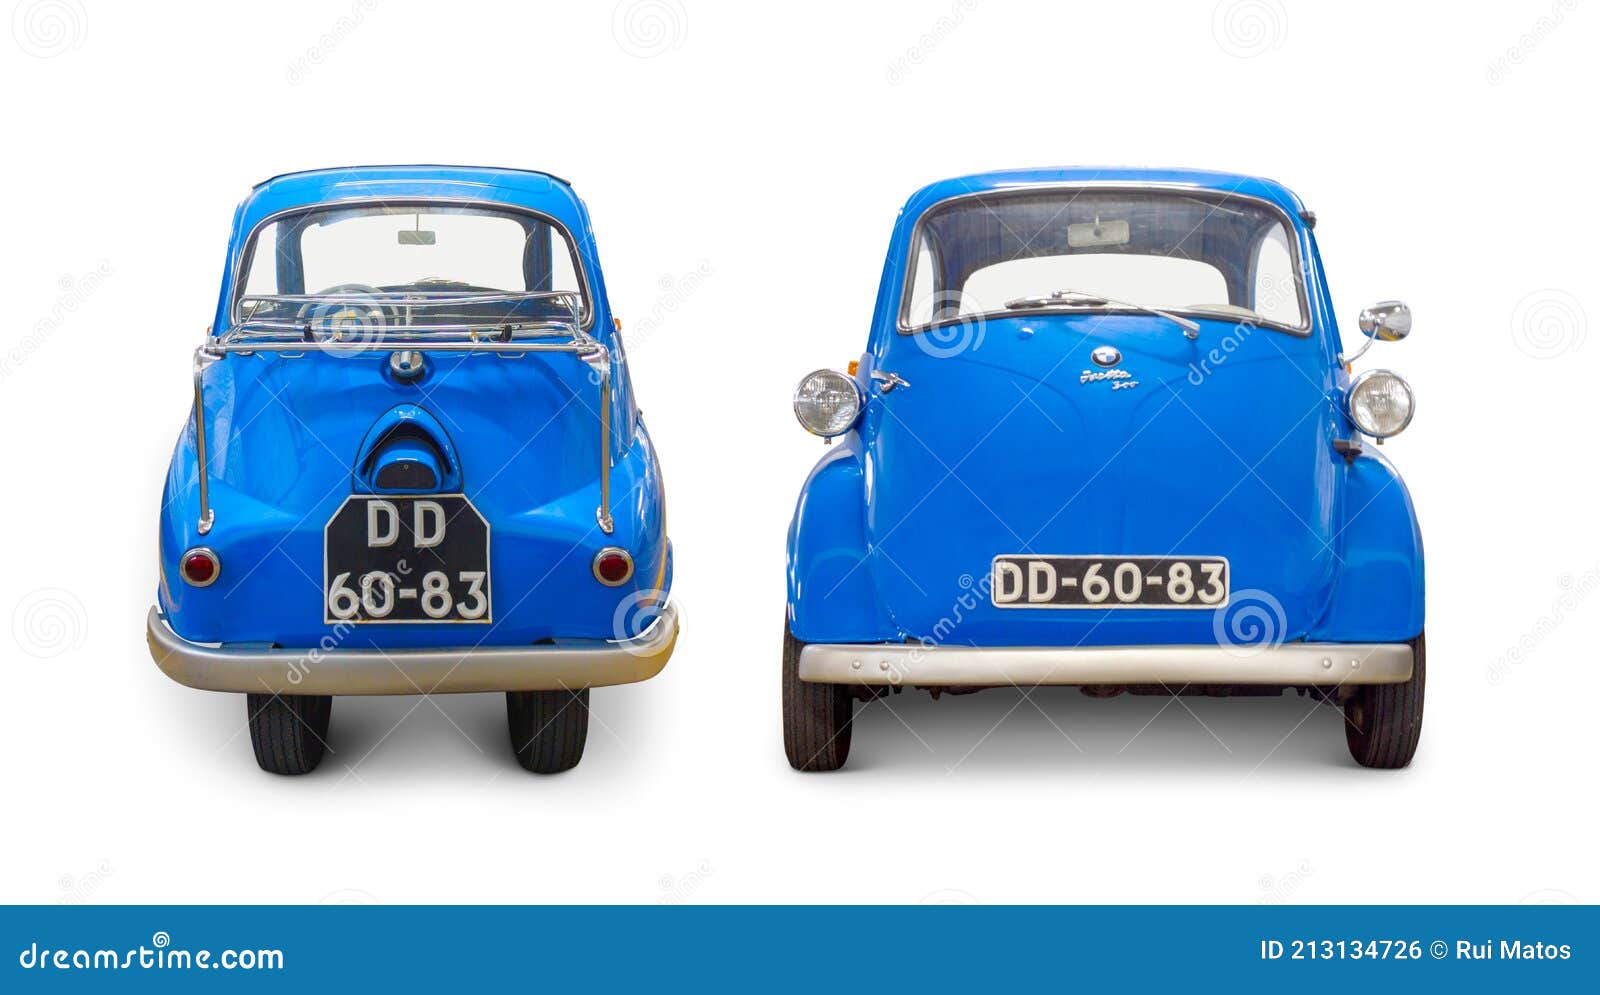 S-5XL Retro Vintage 1950's Isetta Bubble Car Image Image and logo Logo Premium Quality T-shirt High Quality Print Free Fast Delivery